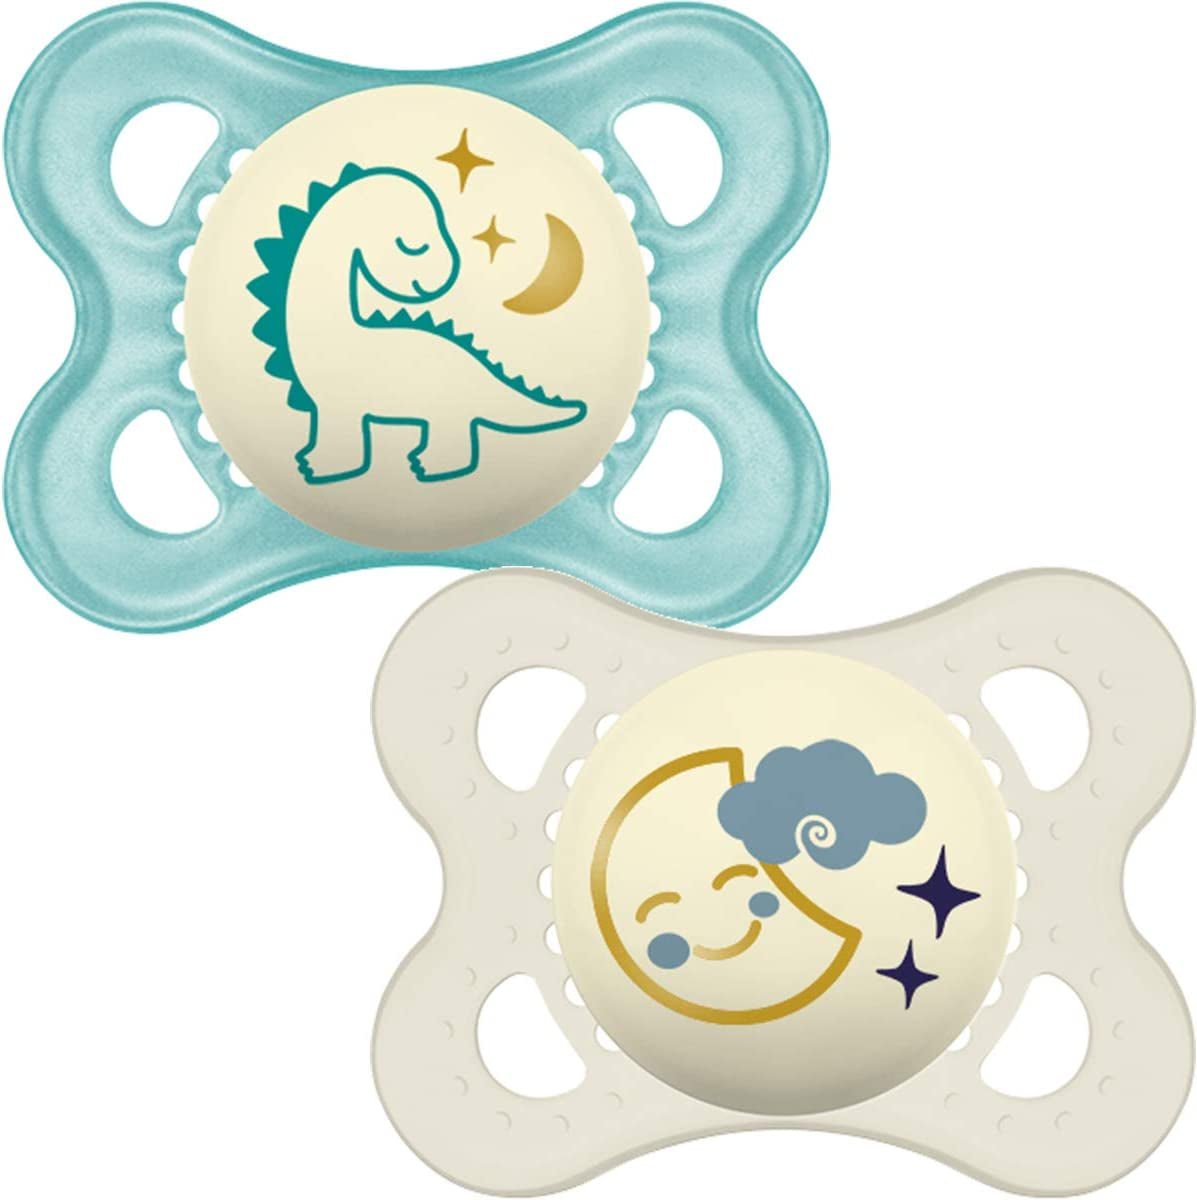 Night Soothers 0+ Months (Pack of 2), Glow in the Dark Baby Soothers with Self Sterilising Travel Case, Newborn Essentials, Blue/White, (Designs May Vary) - FoxMart™️ - FoxMart™️